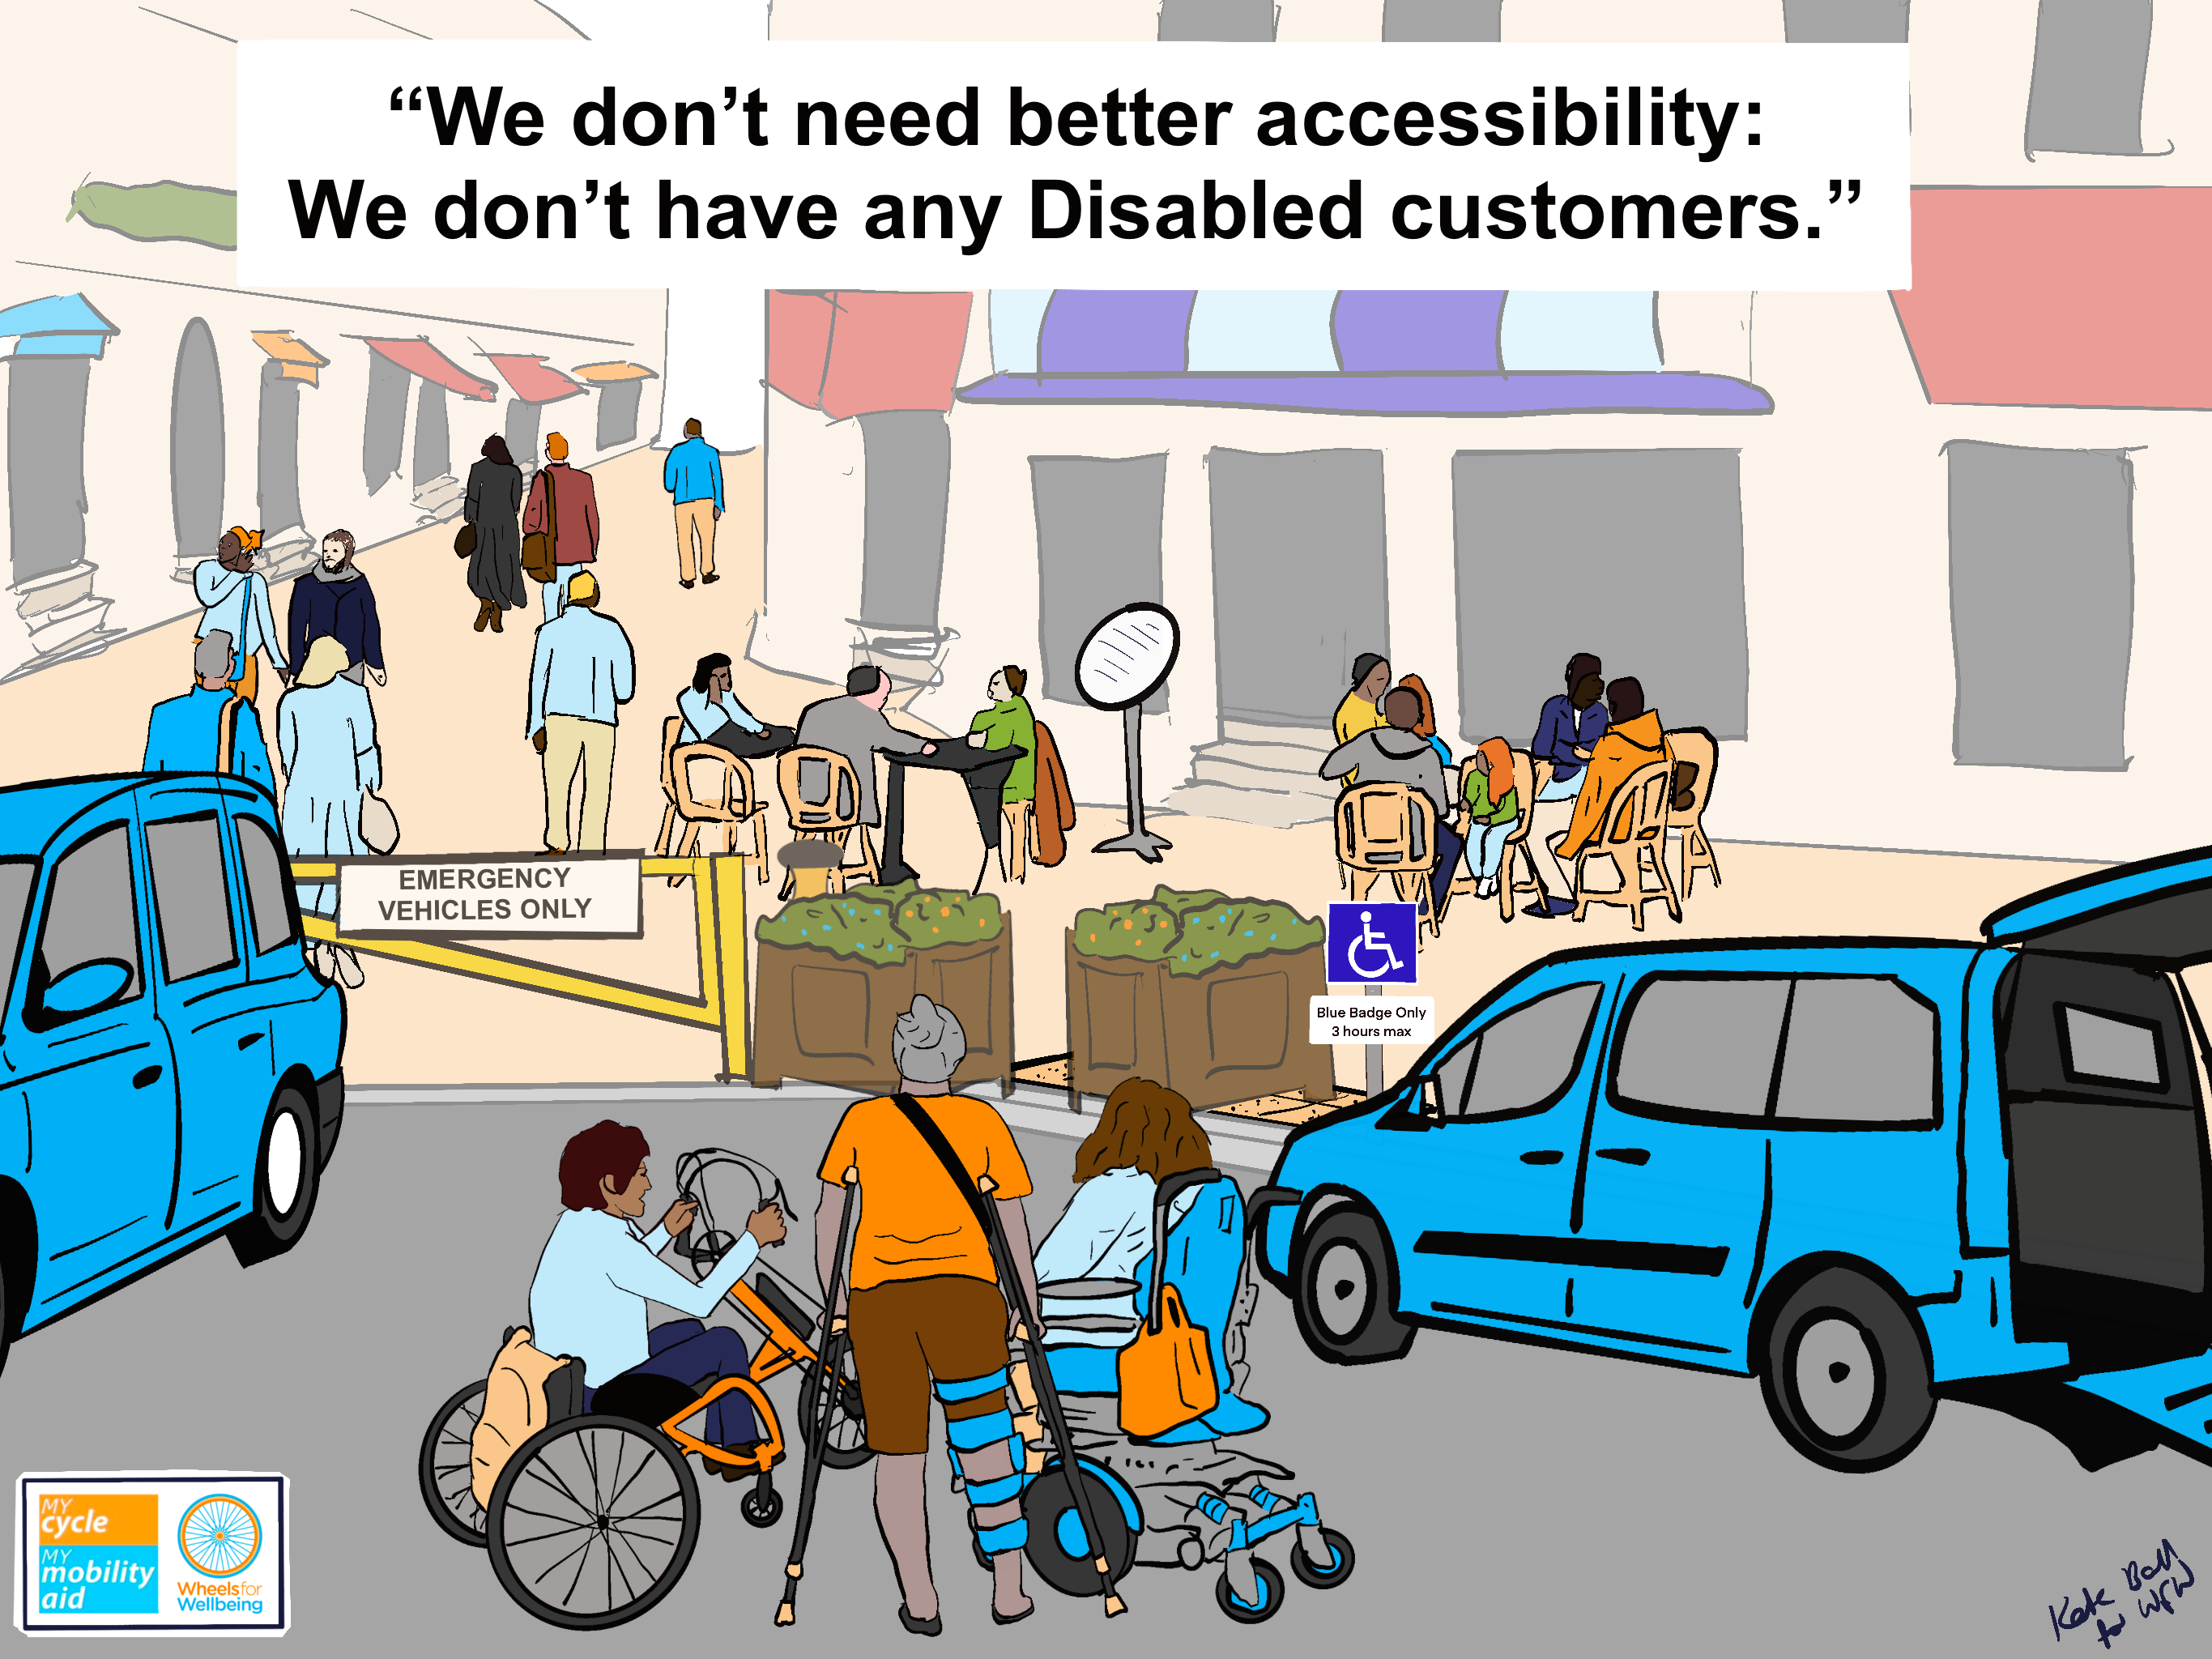 Graphic shows in foreground three people, one using a powerchair, one with a leg brace and crutches and one using a manual wheelchair with clip-on e-handcycle together next to an open wheelchair accessible vehicle.
Beyond them is a pedestrianised shopping street with café tables, people walking and steps up into every shop.
Between the Disabled people in the foreground and the pedestrianised street is a parked taxi, planters blocking a tactile-paved dropped kerb, a sign saying “blue badge holders only 3 hours max” and a big yellow barrier with an “emergency vehicles only sign”. The Disabled people clearly cannot get to the pedestrianised space.
Caption at the top reads “We don’t need better accessibility: We don’t have any Disabled customers.”
In the bottom left is the Wheels for Wellbeing orange and blue logo and the My Cycle My Mobility Aid logo. There is a signature “Kate Ball for WfW” in the bottom right.